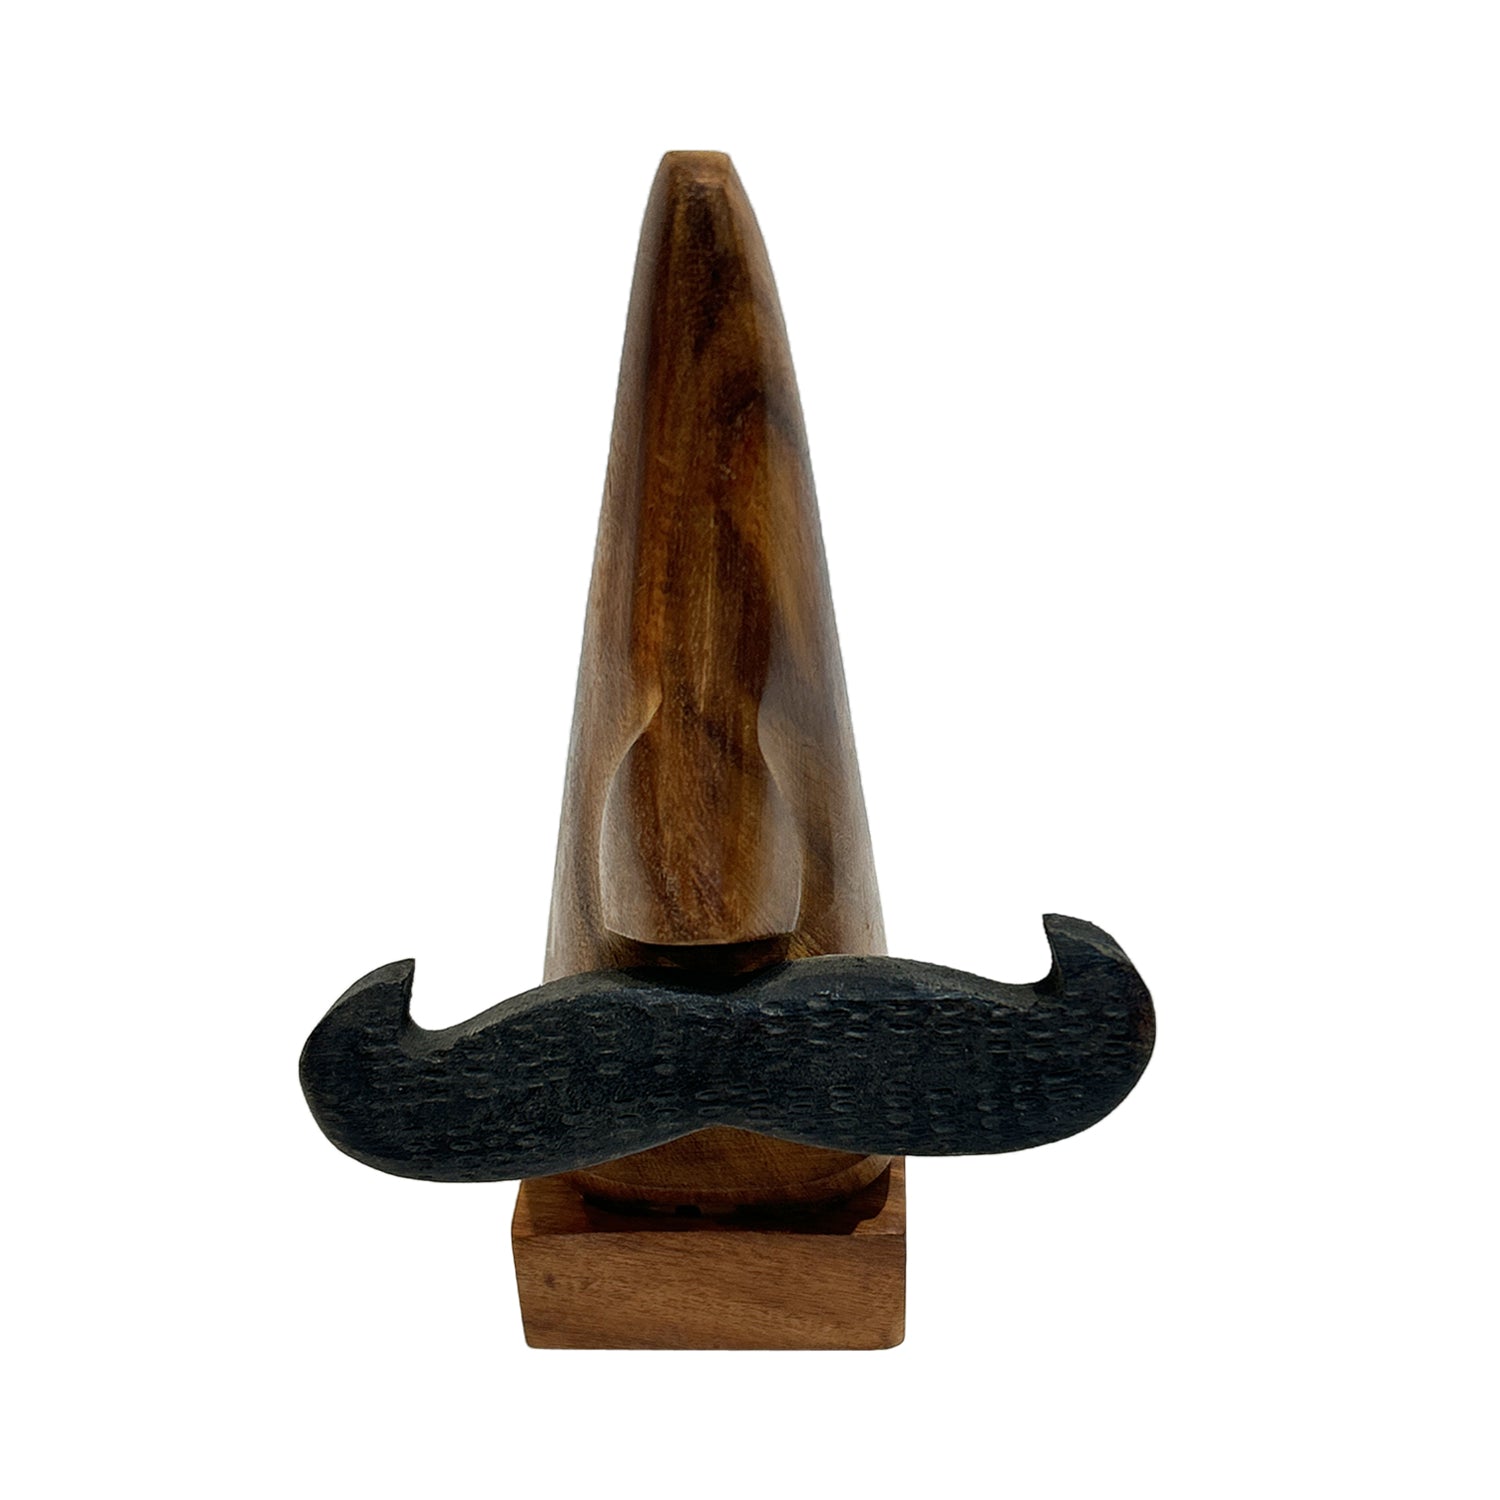 Handmade Wooden Nose Shaped Spectacle Holder Stand with Moustache